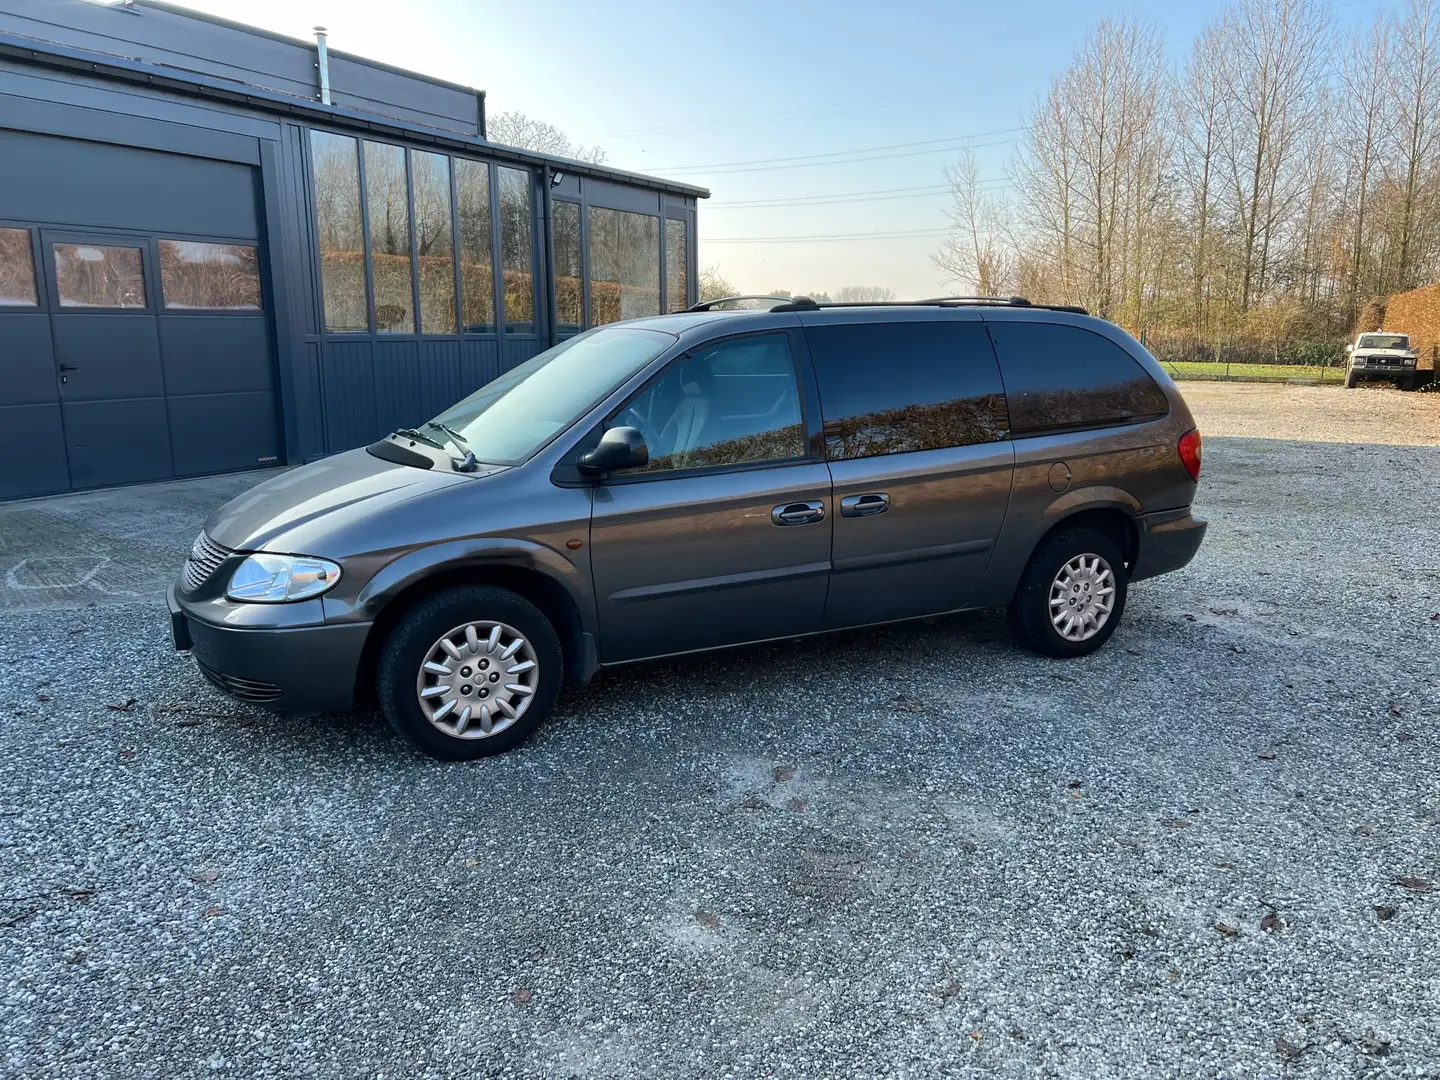 Chrysler Voyager 2.5 Turbo CRD 16v SE 5 PLACES /// UTILUTAIRE// siva - 2